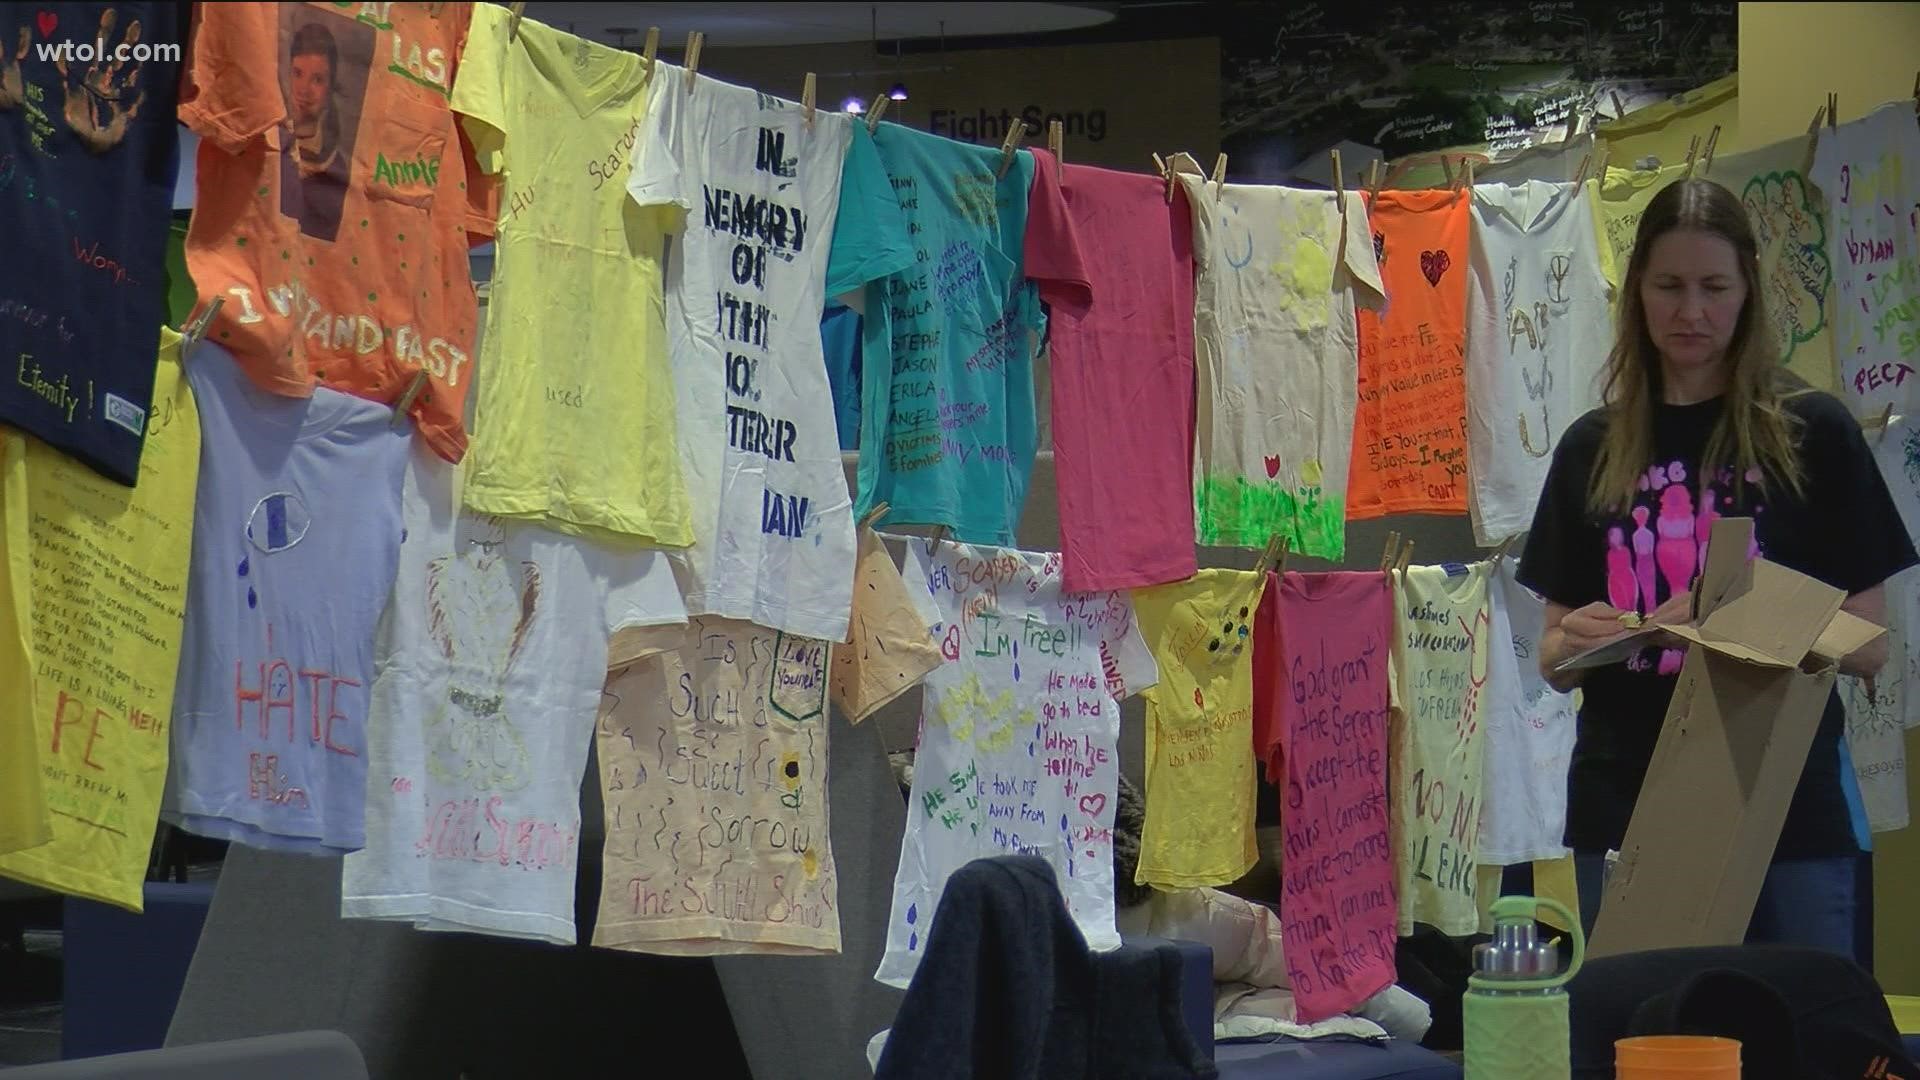 People from all over came together at the University of Toledo to take a stand against sexual assault. The event helps bring awareness to the underreported crime.